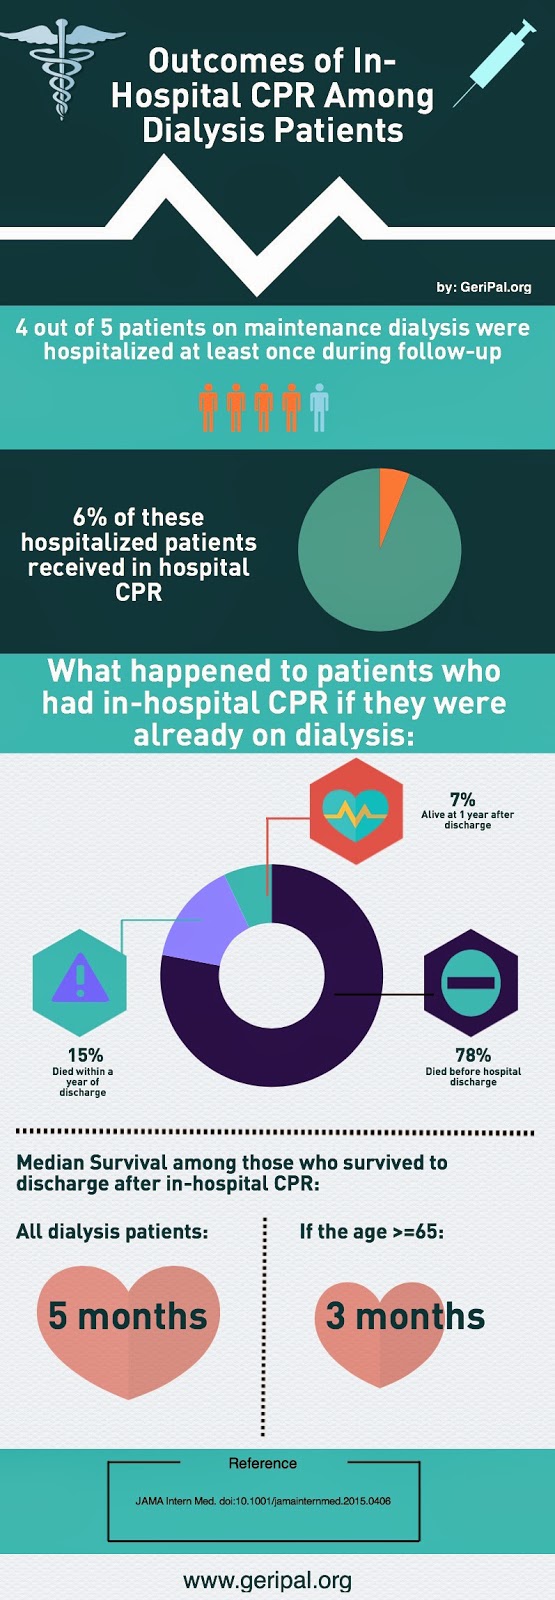 Outcomes of In-Hospital CPR in Patients Receiving Dialysis